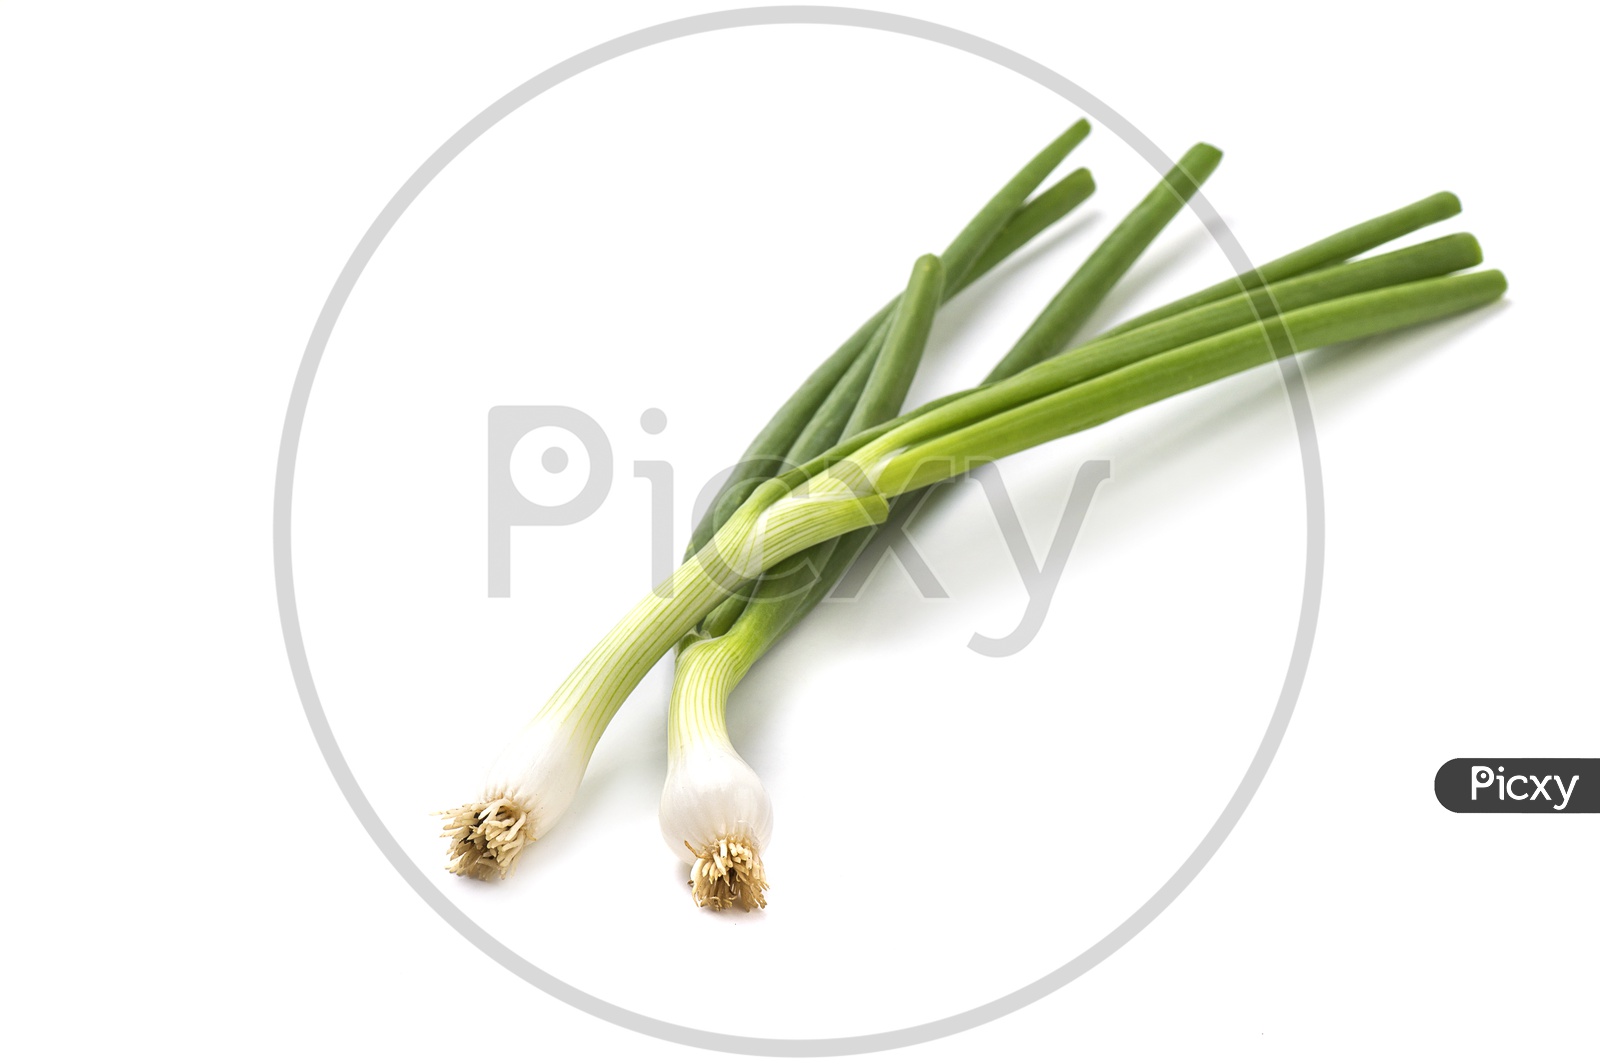 Fresh Green Spring Onion With Roots On an Isolated White Background